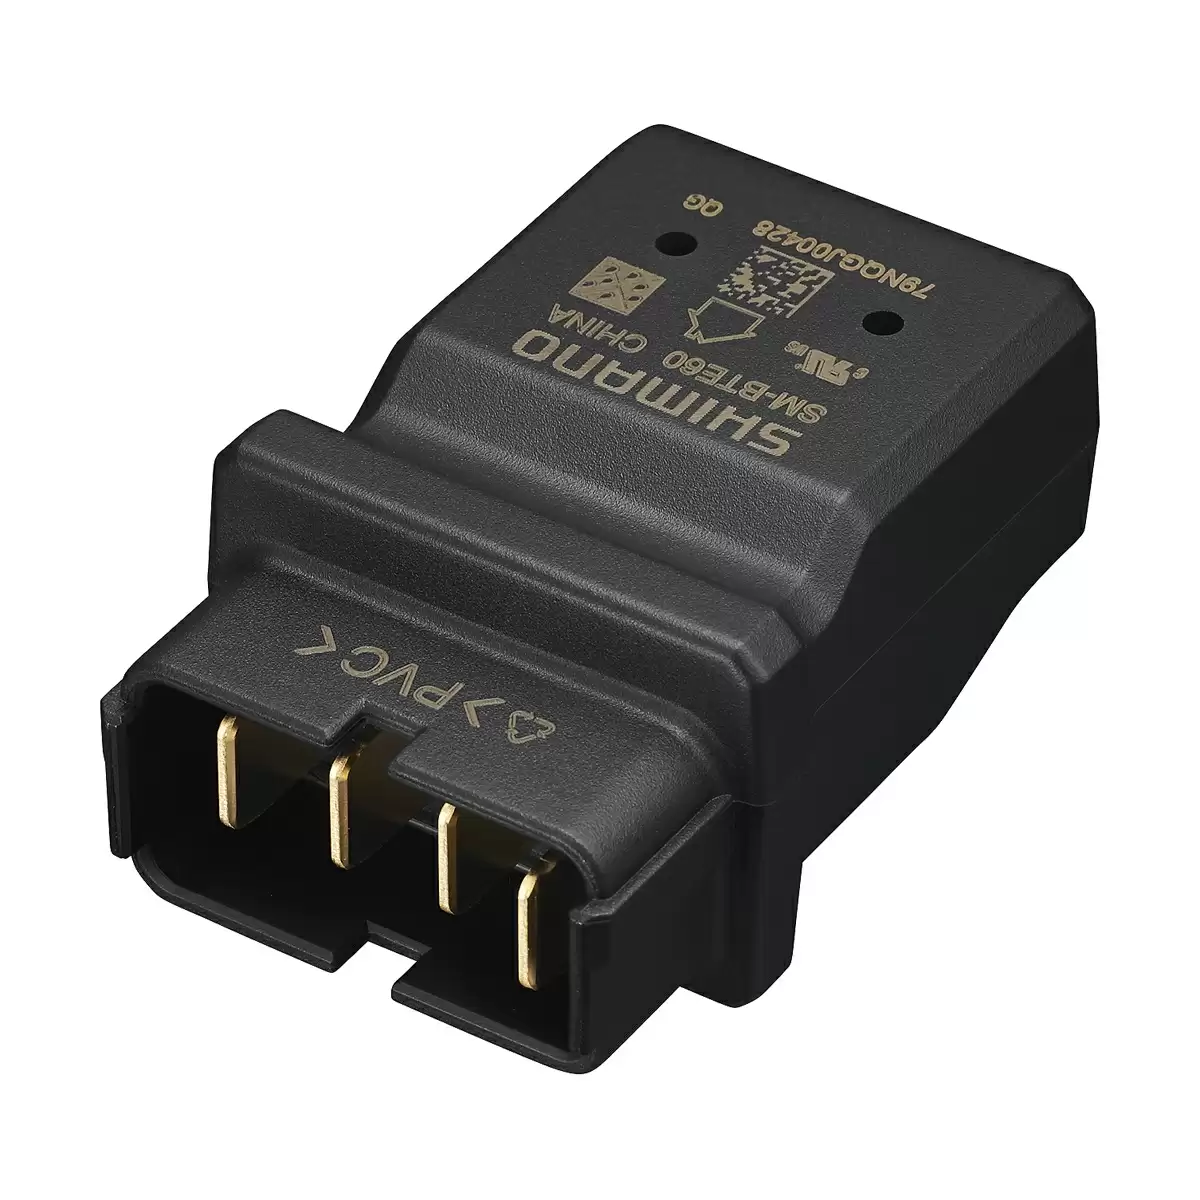 Charger adapter SM-BTE60 for E6010 battery - image